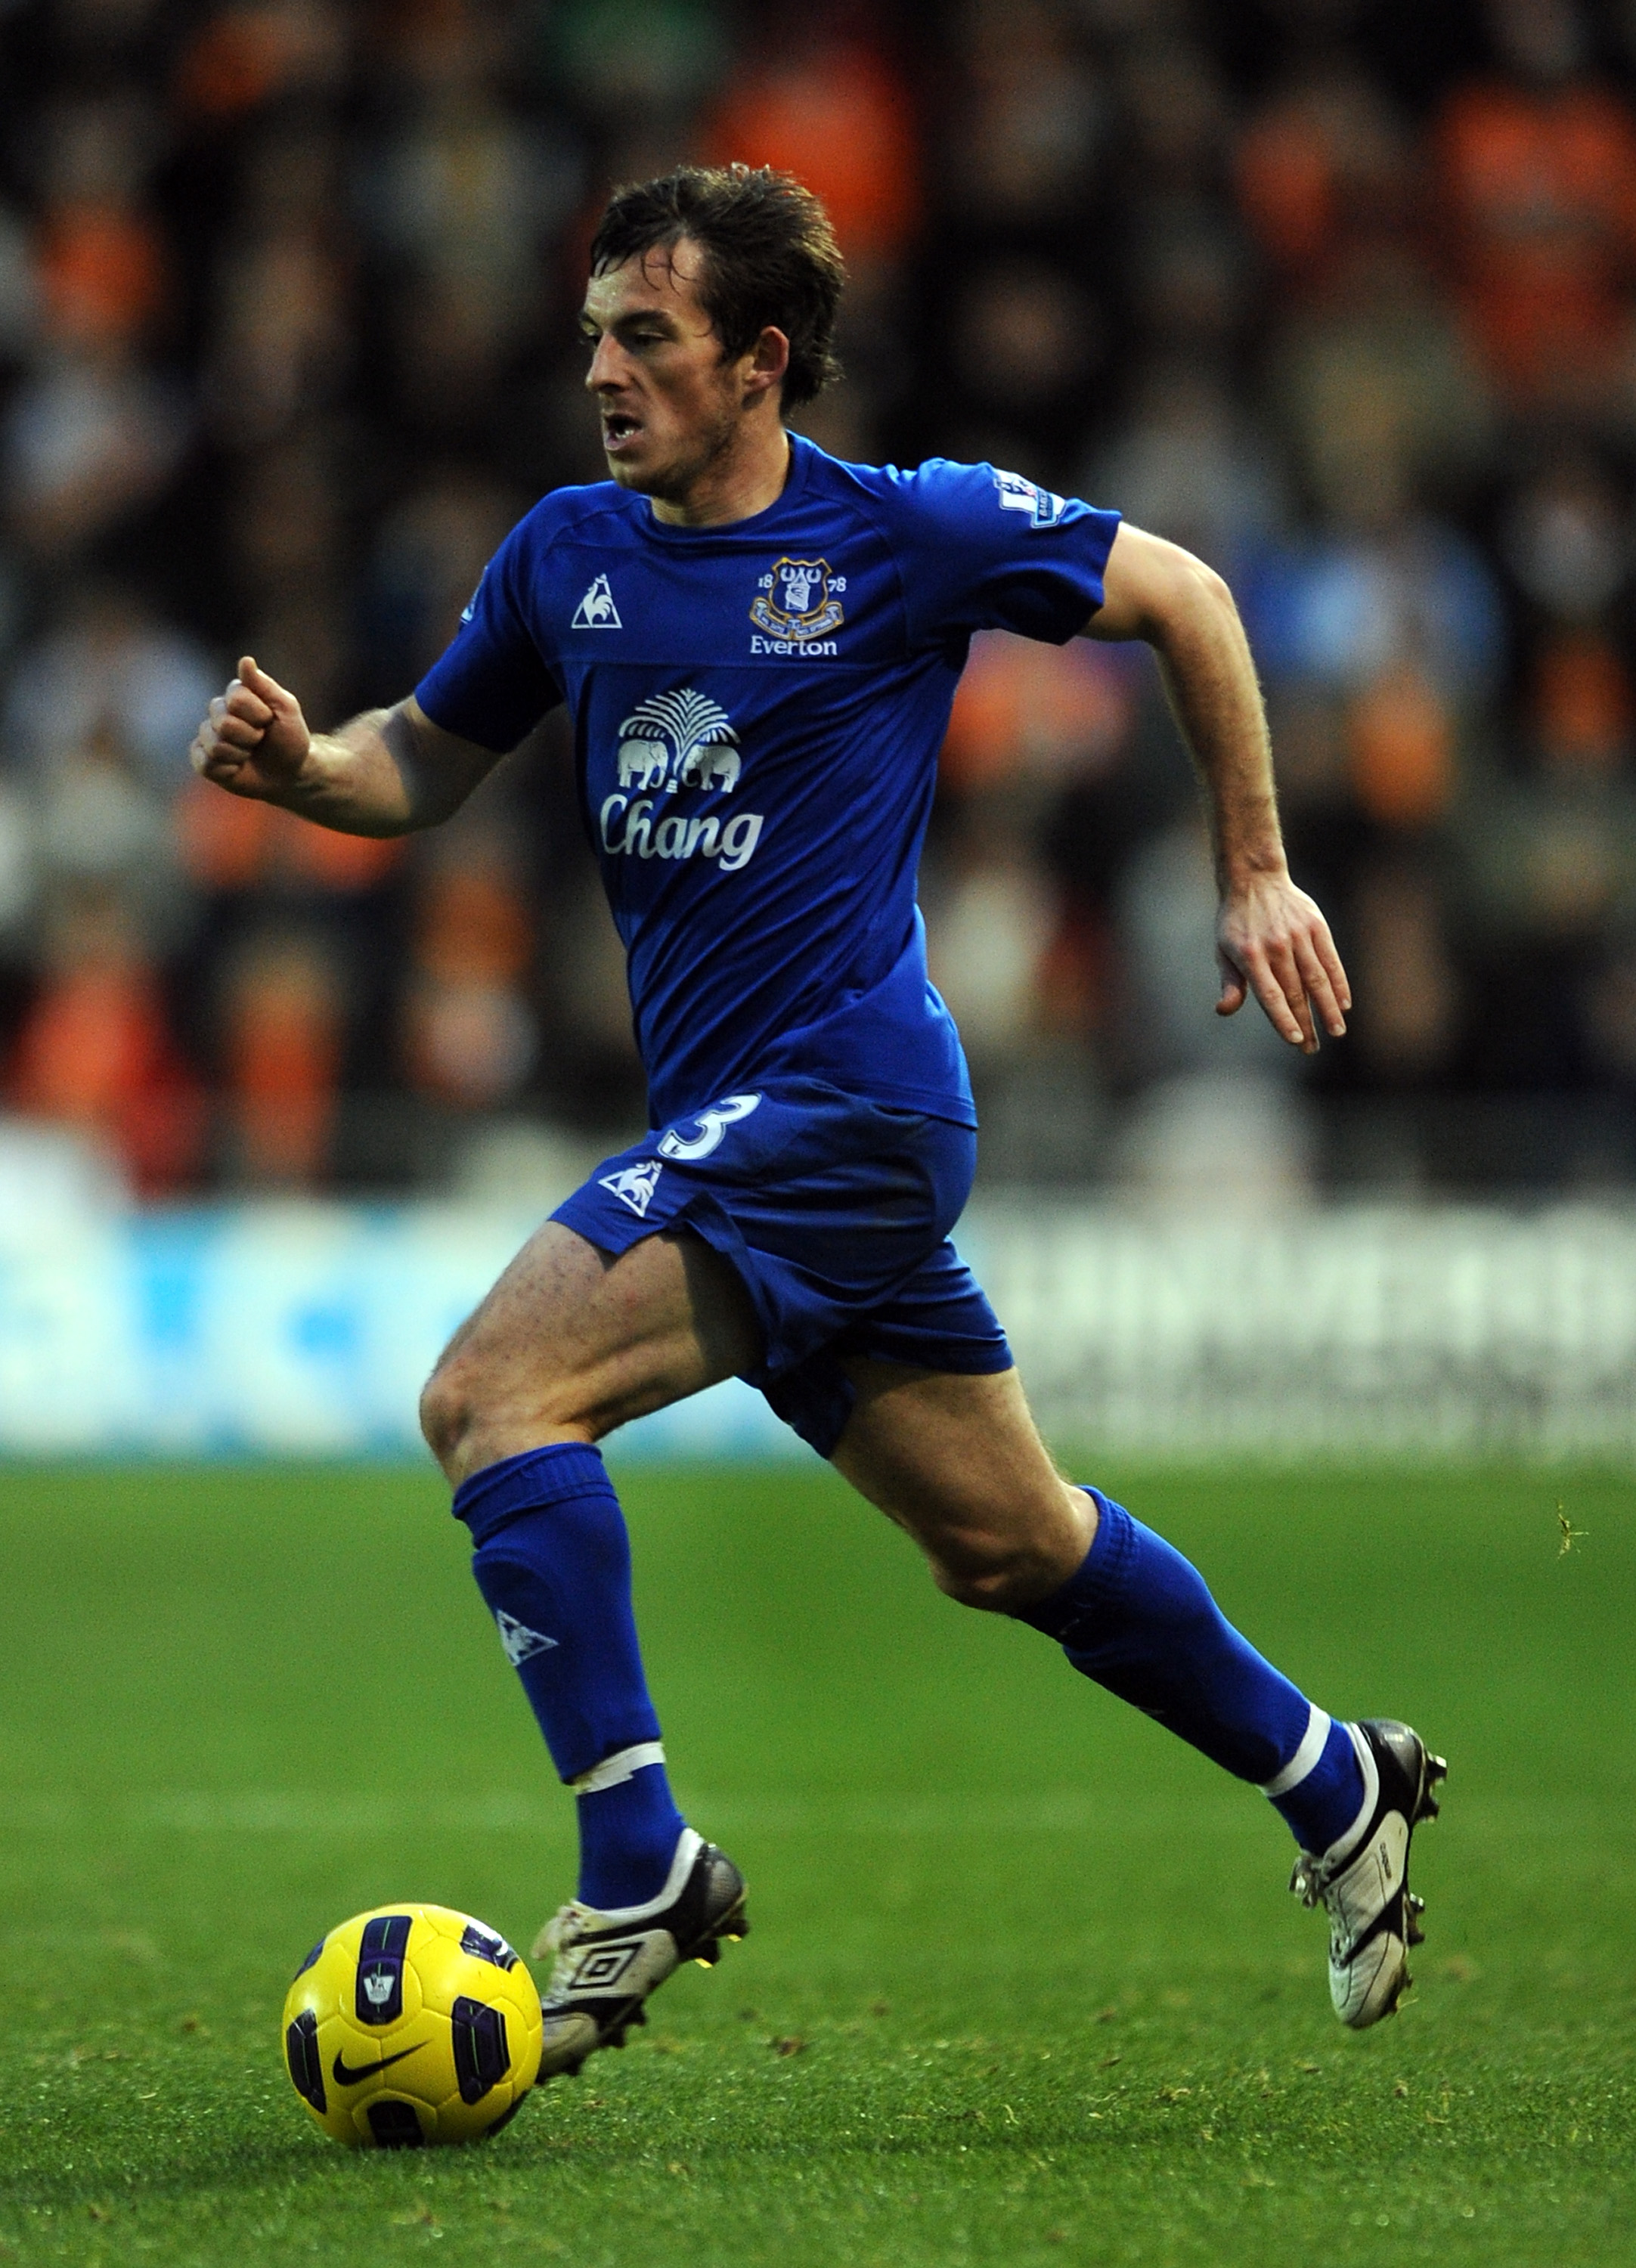 BLACKPOOL, ENGLAND - NOVEMBER 06:  Leighton Baines of Everton during the Barclays Premier League match between Blackpool and Everton at Bloomfield Road on November 6, 2010 in Blackpool, England.  (Photo by Chris Brunskill/Getty Images)